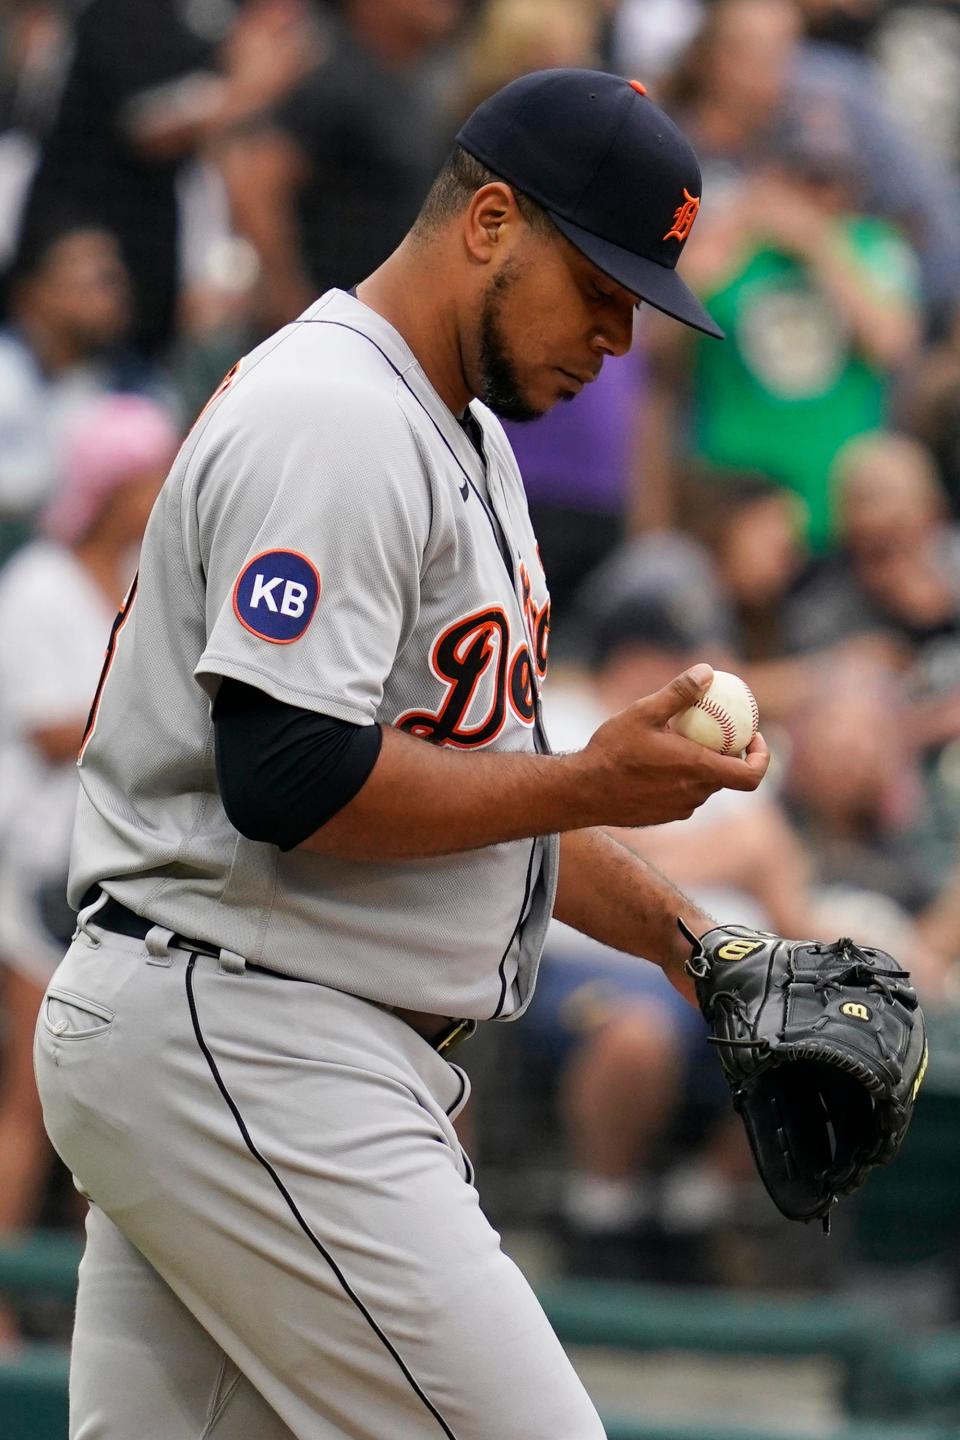 Tigers pitcher Wily Peralta looks at the ball after White Sox catcher Seby Zavala hit an RBI double during the eighth inning of the Tigers' 5-3 loss on Sunday, Aug. 14, 2022, in Chicago.